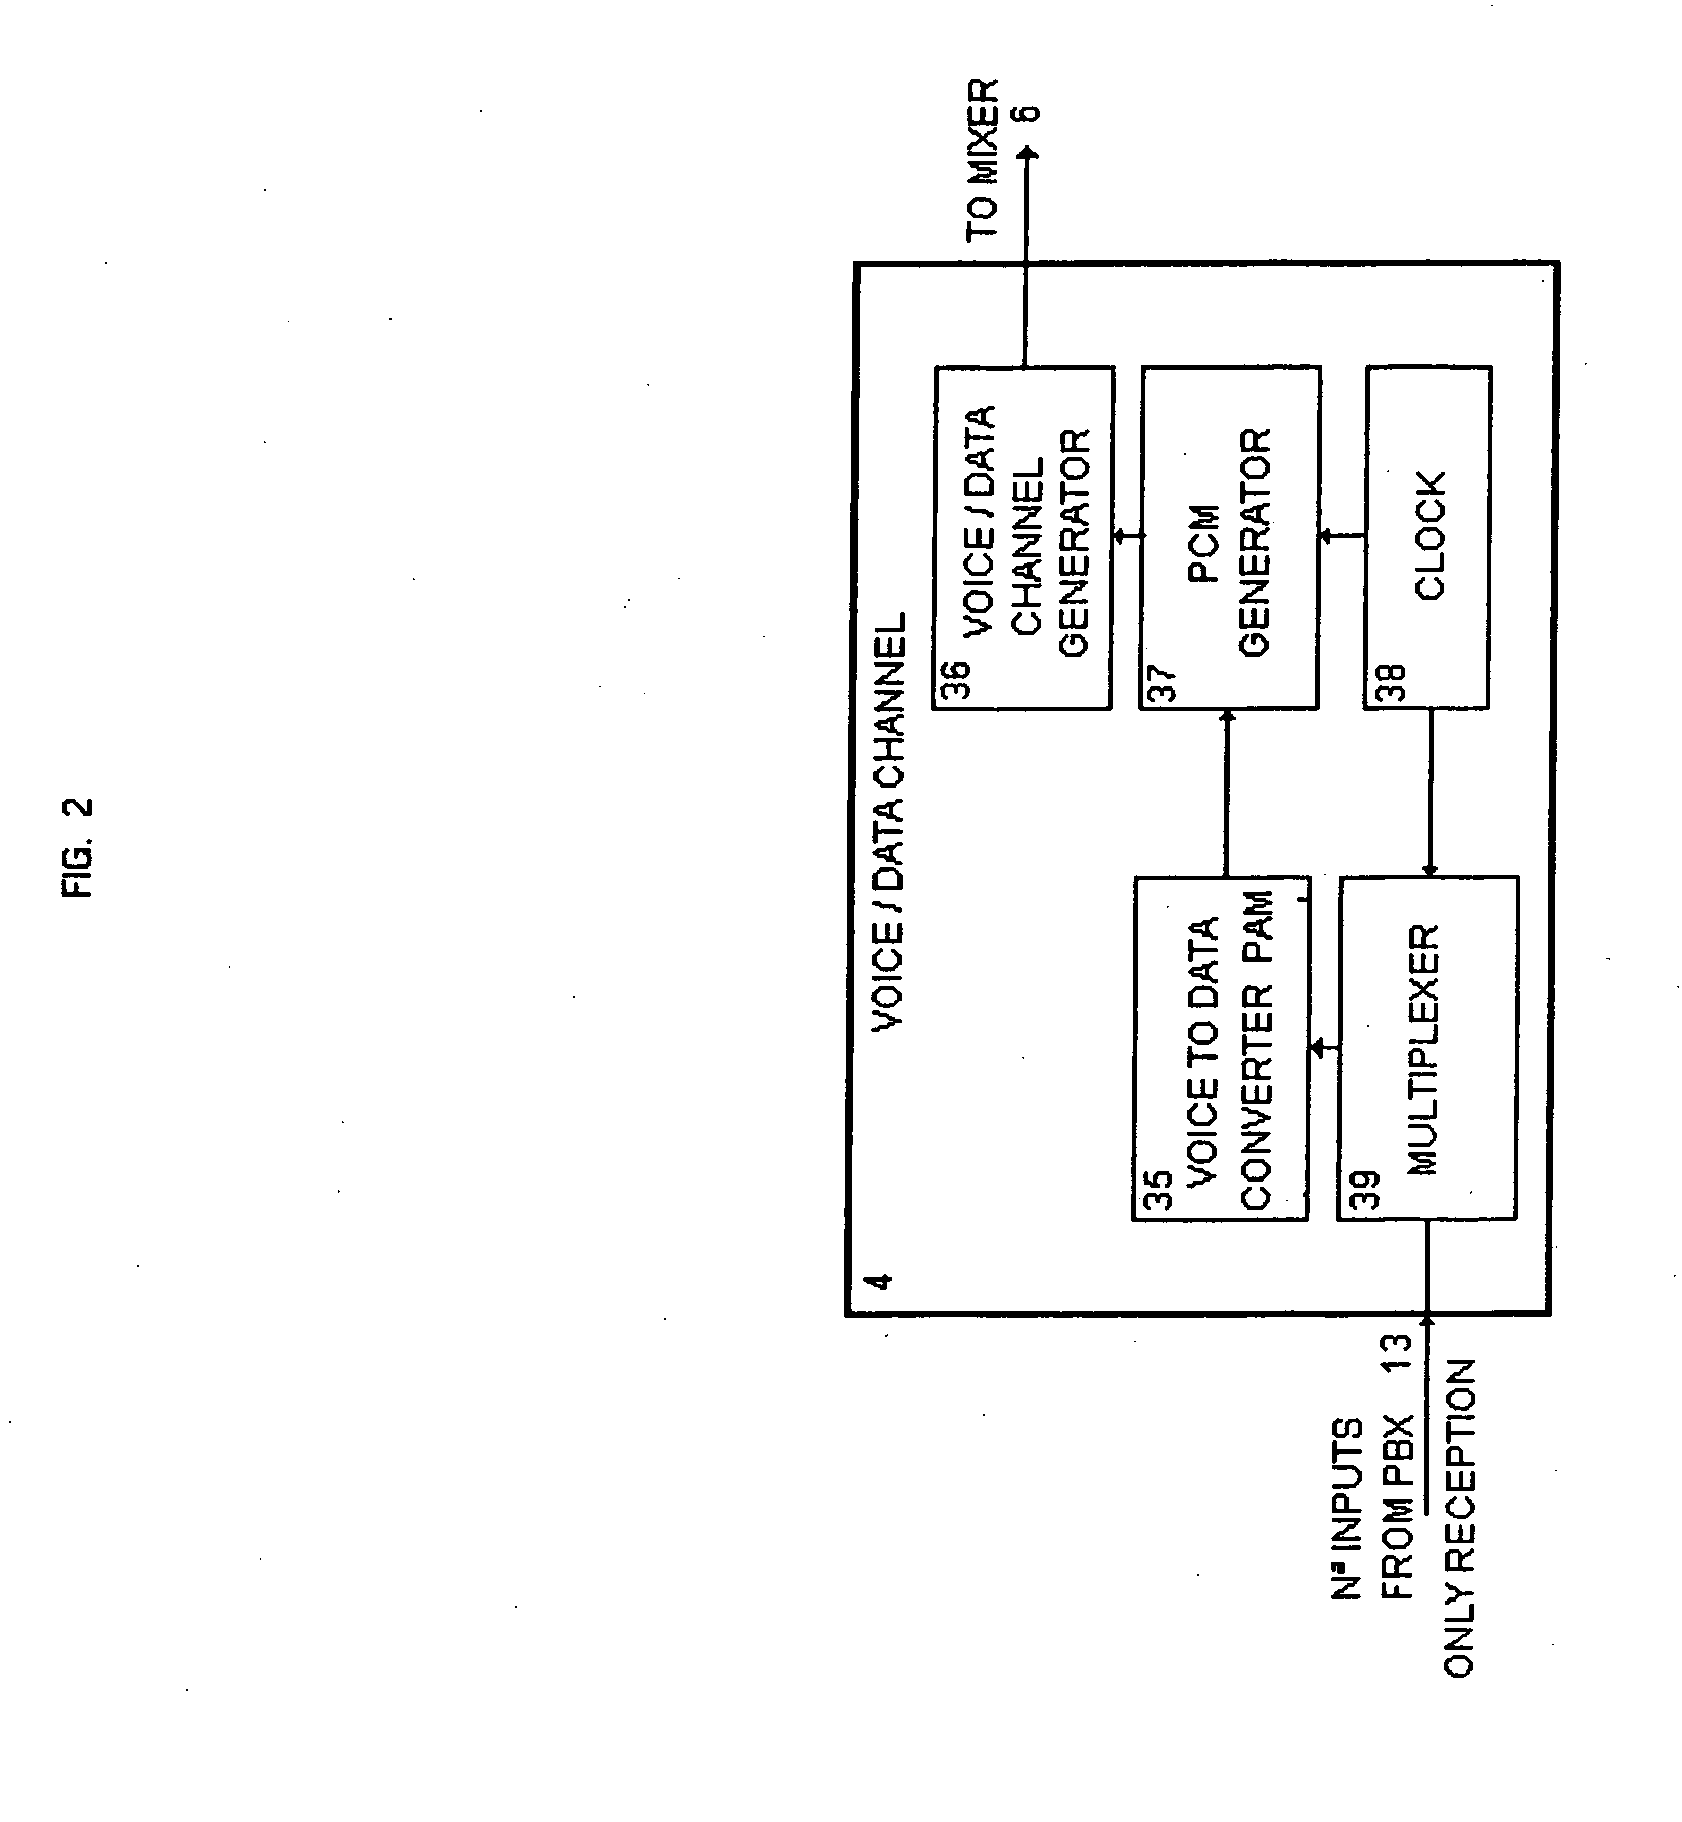 System for bi-directional voice and data communications over a video distribution network